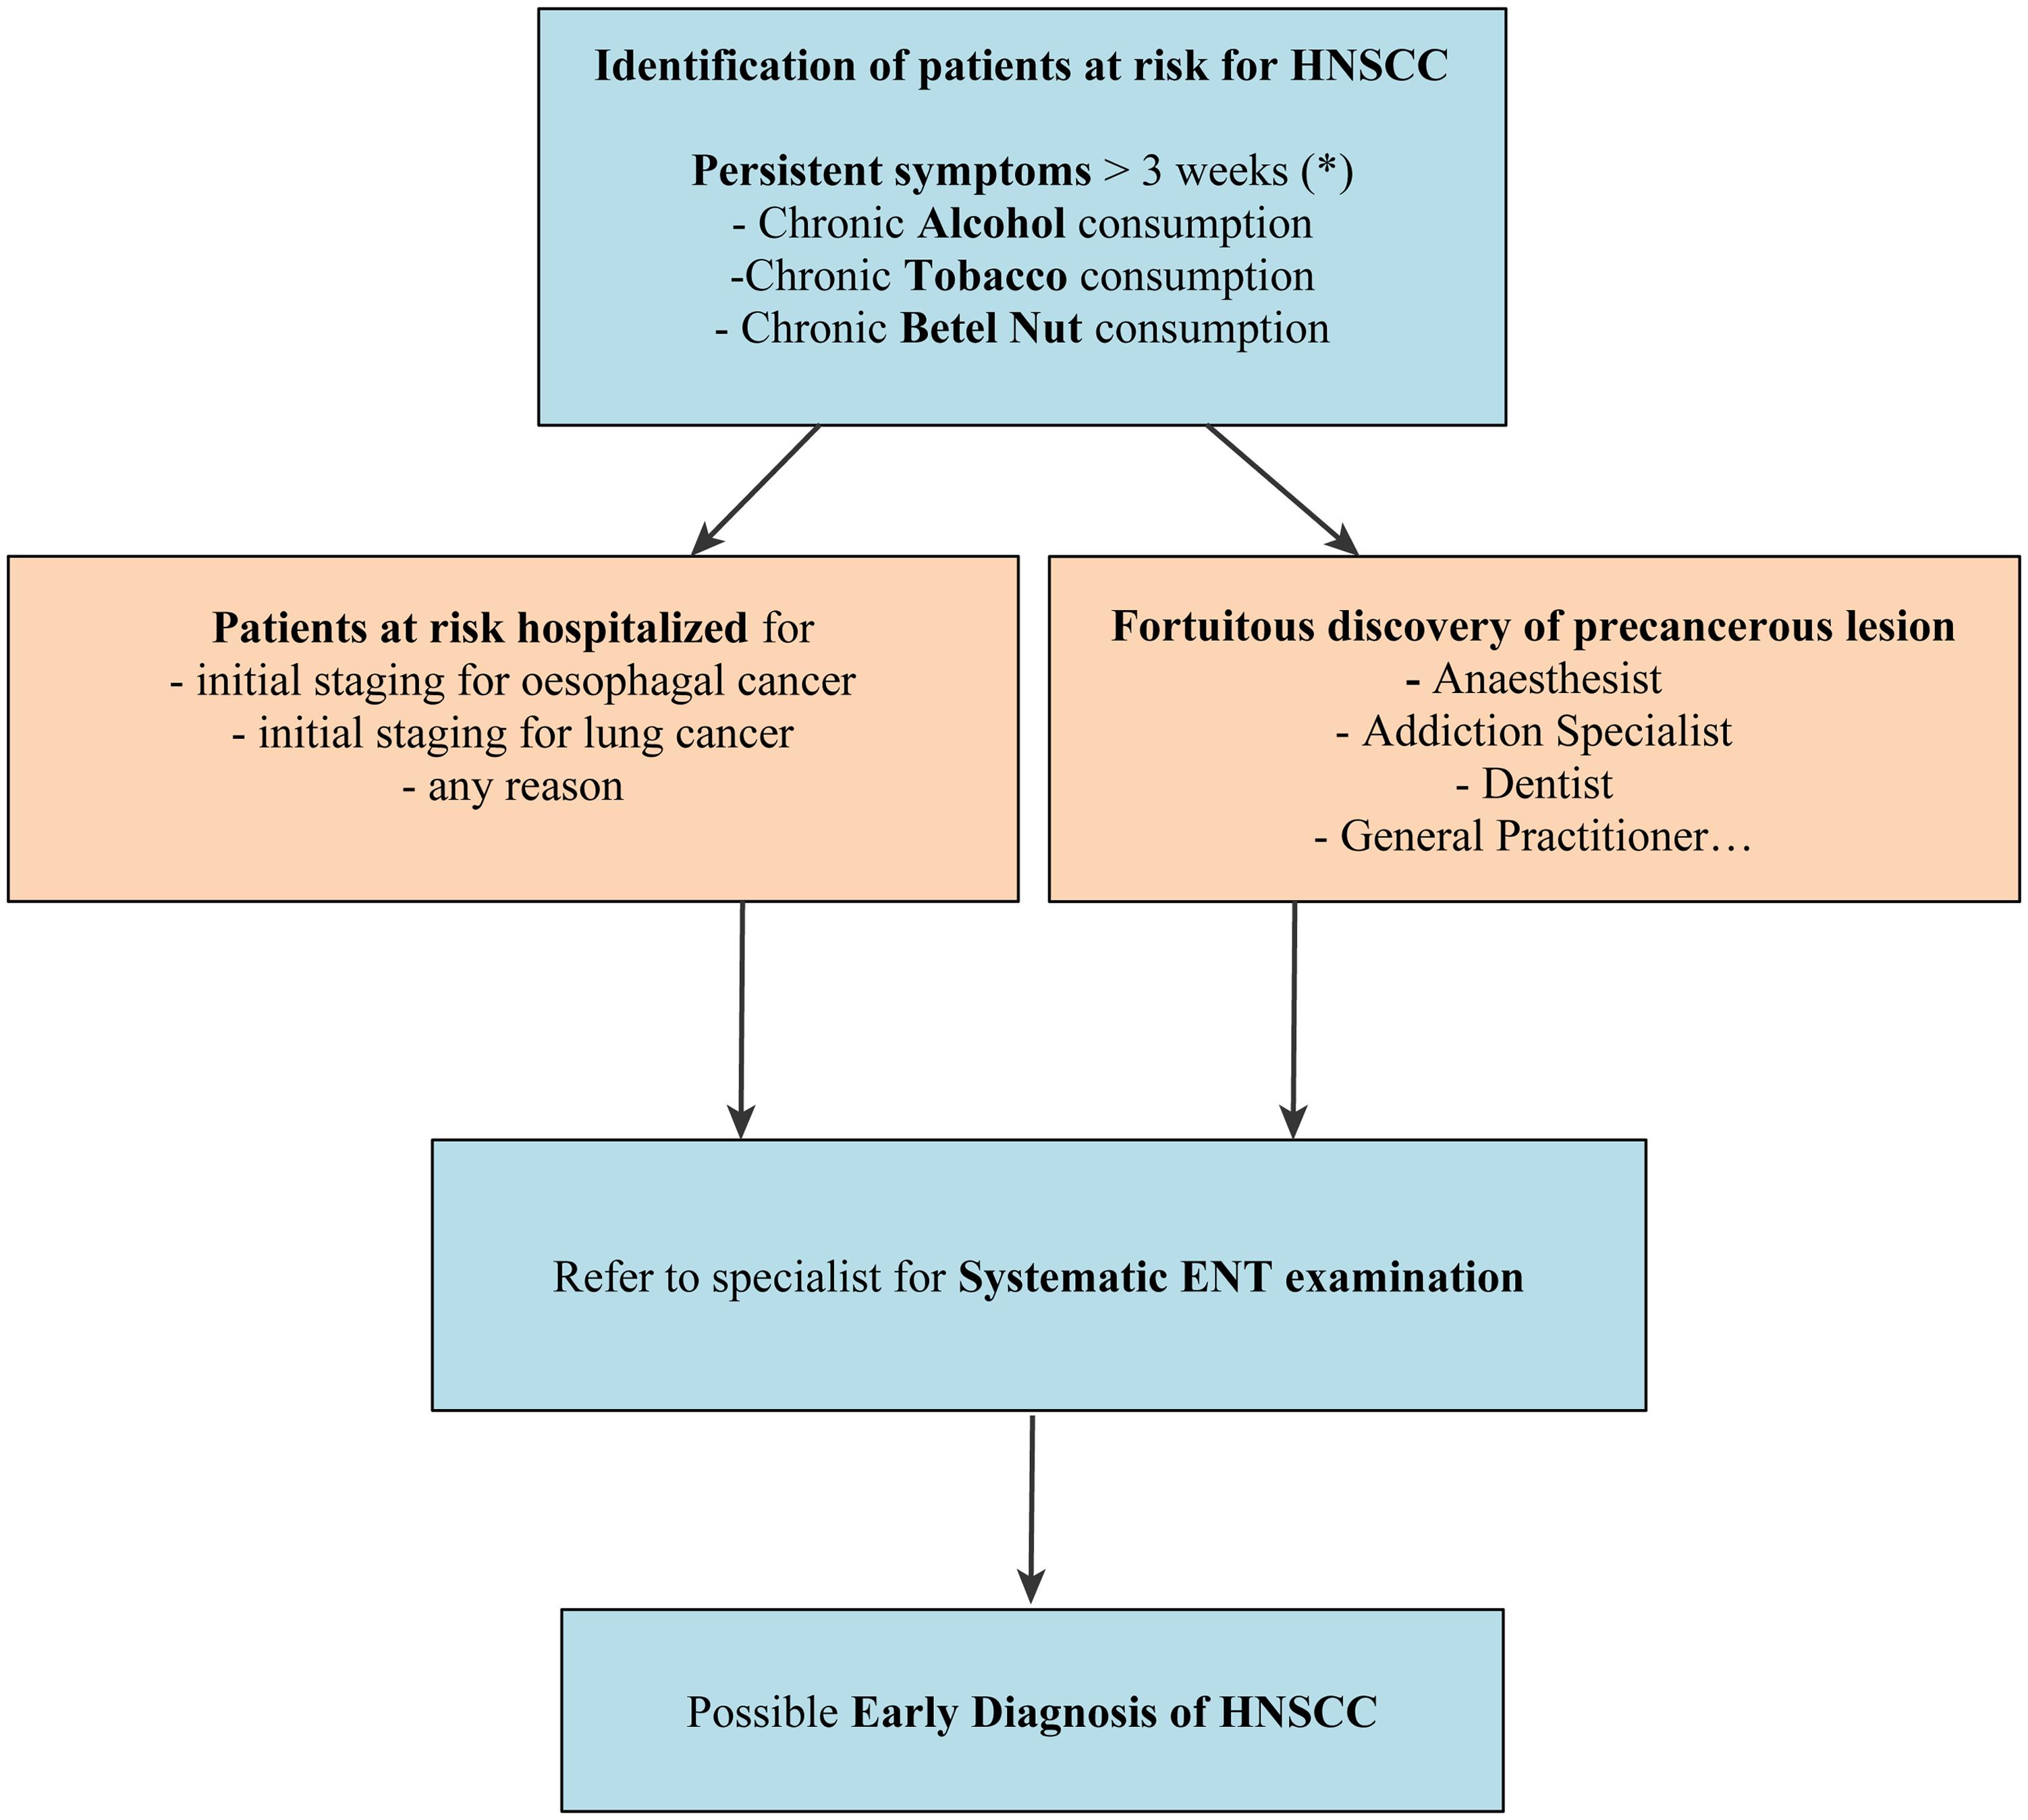 Possible patient pathways for early diagnosis of HNSCC.